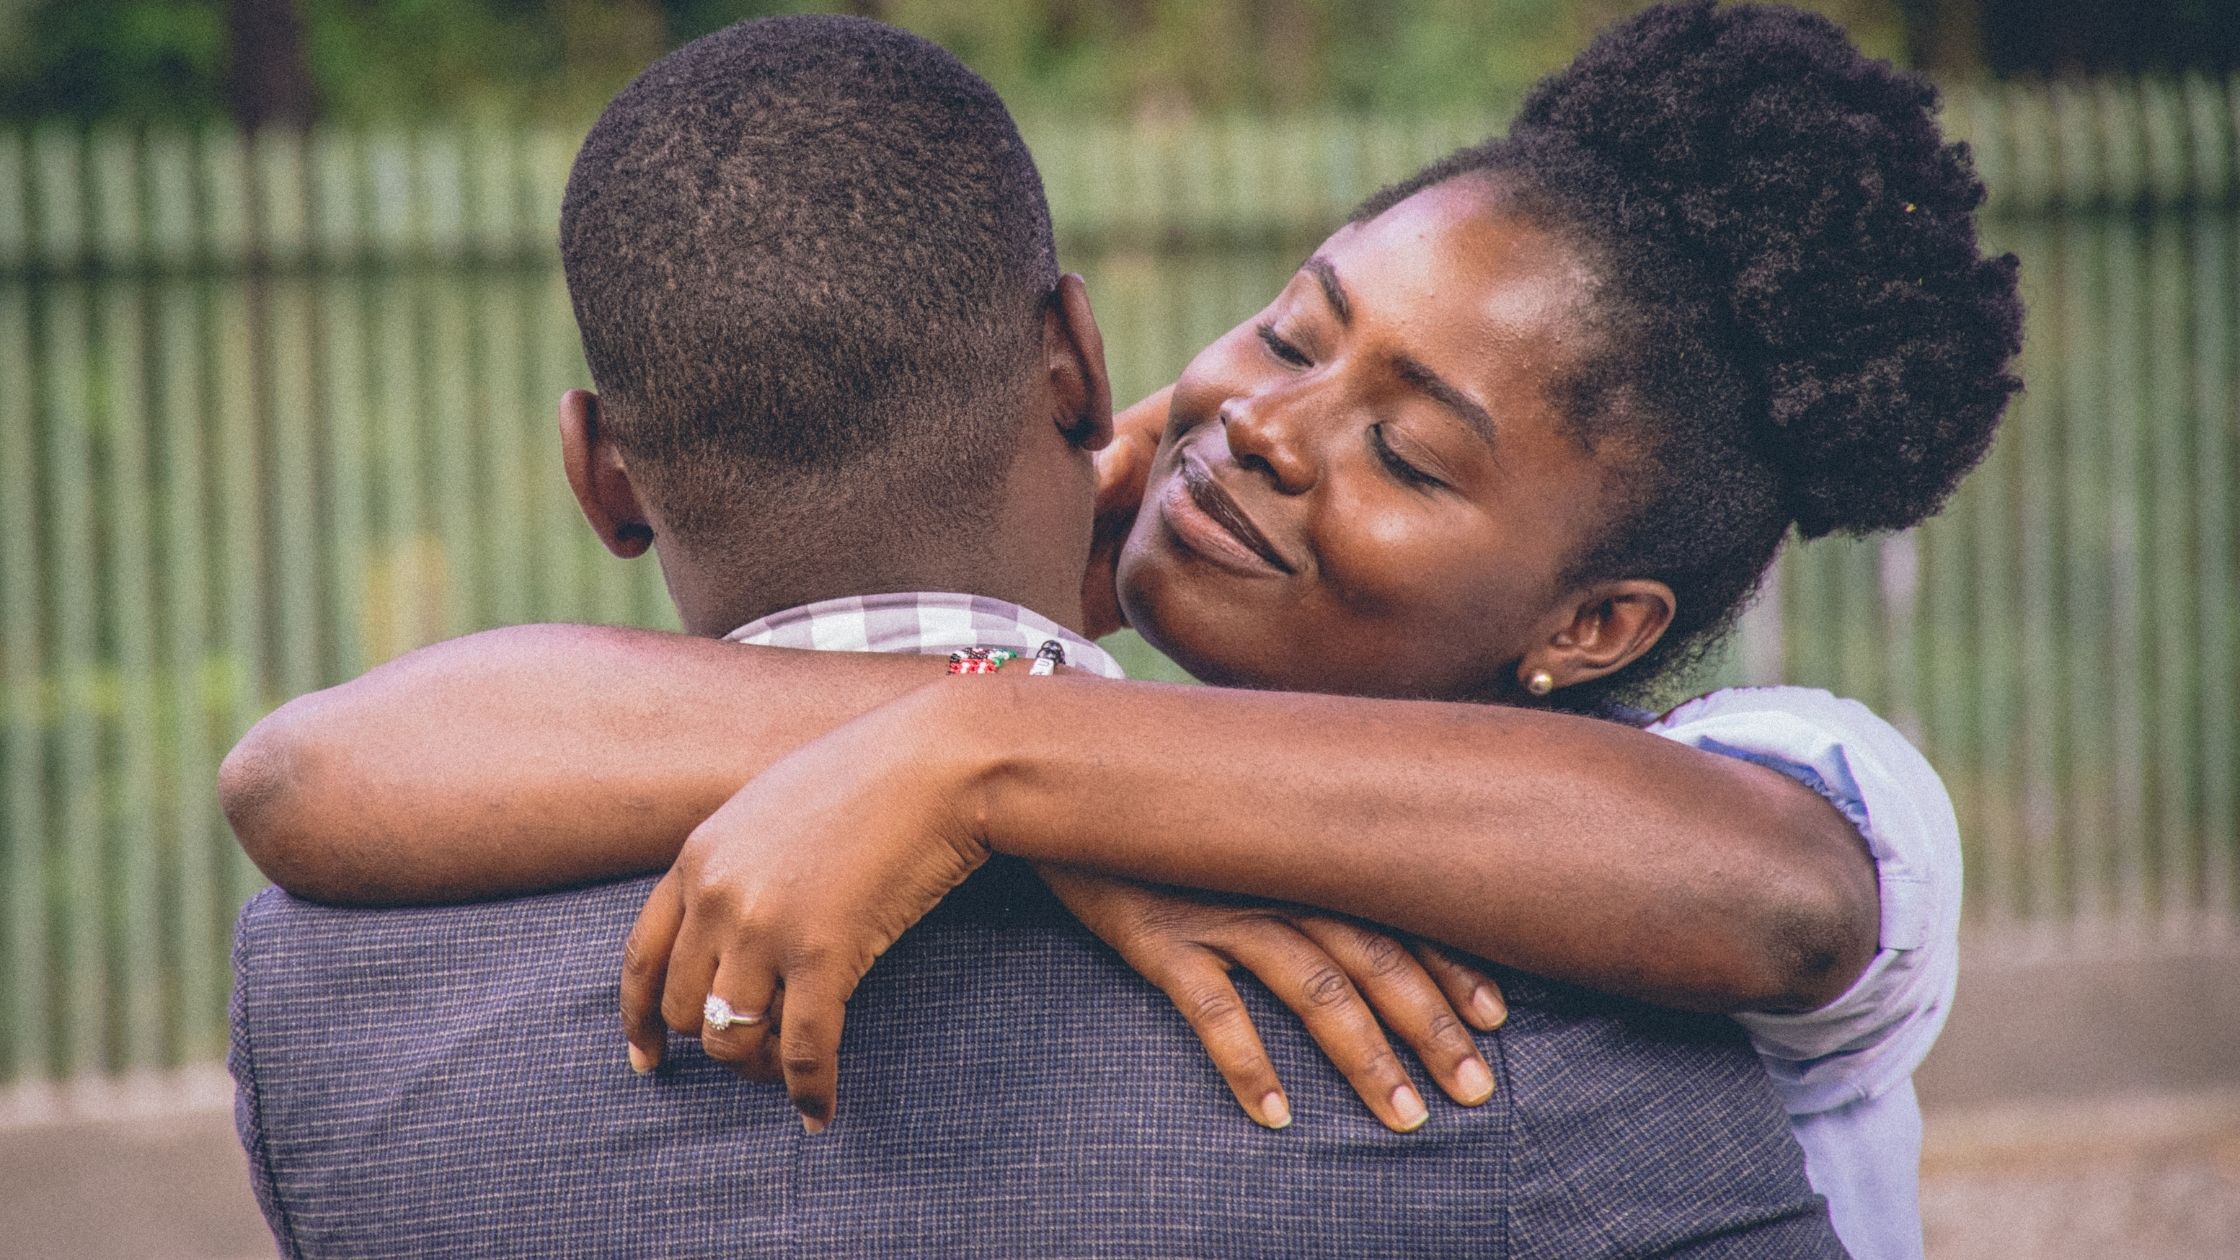 An african american couple embrace. His head is to the camera and her face is happy looking at him